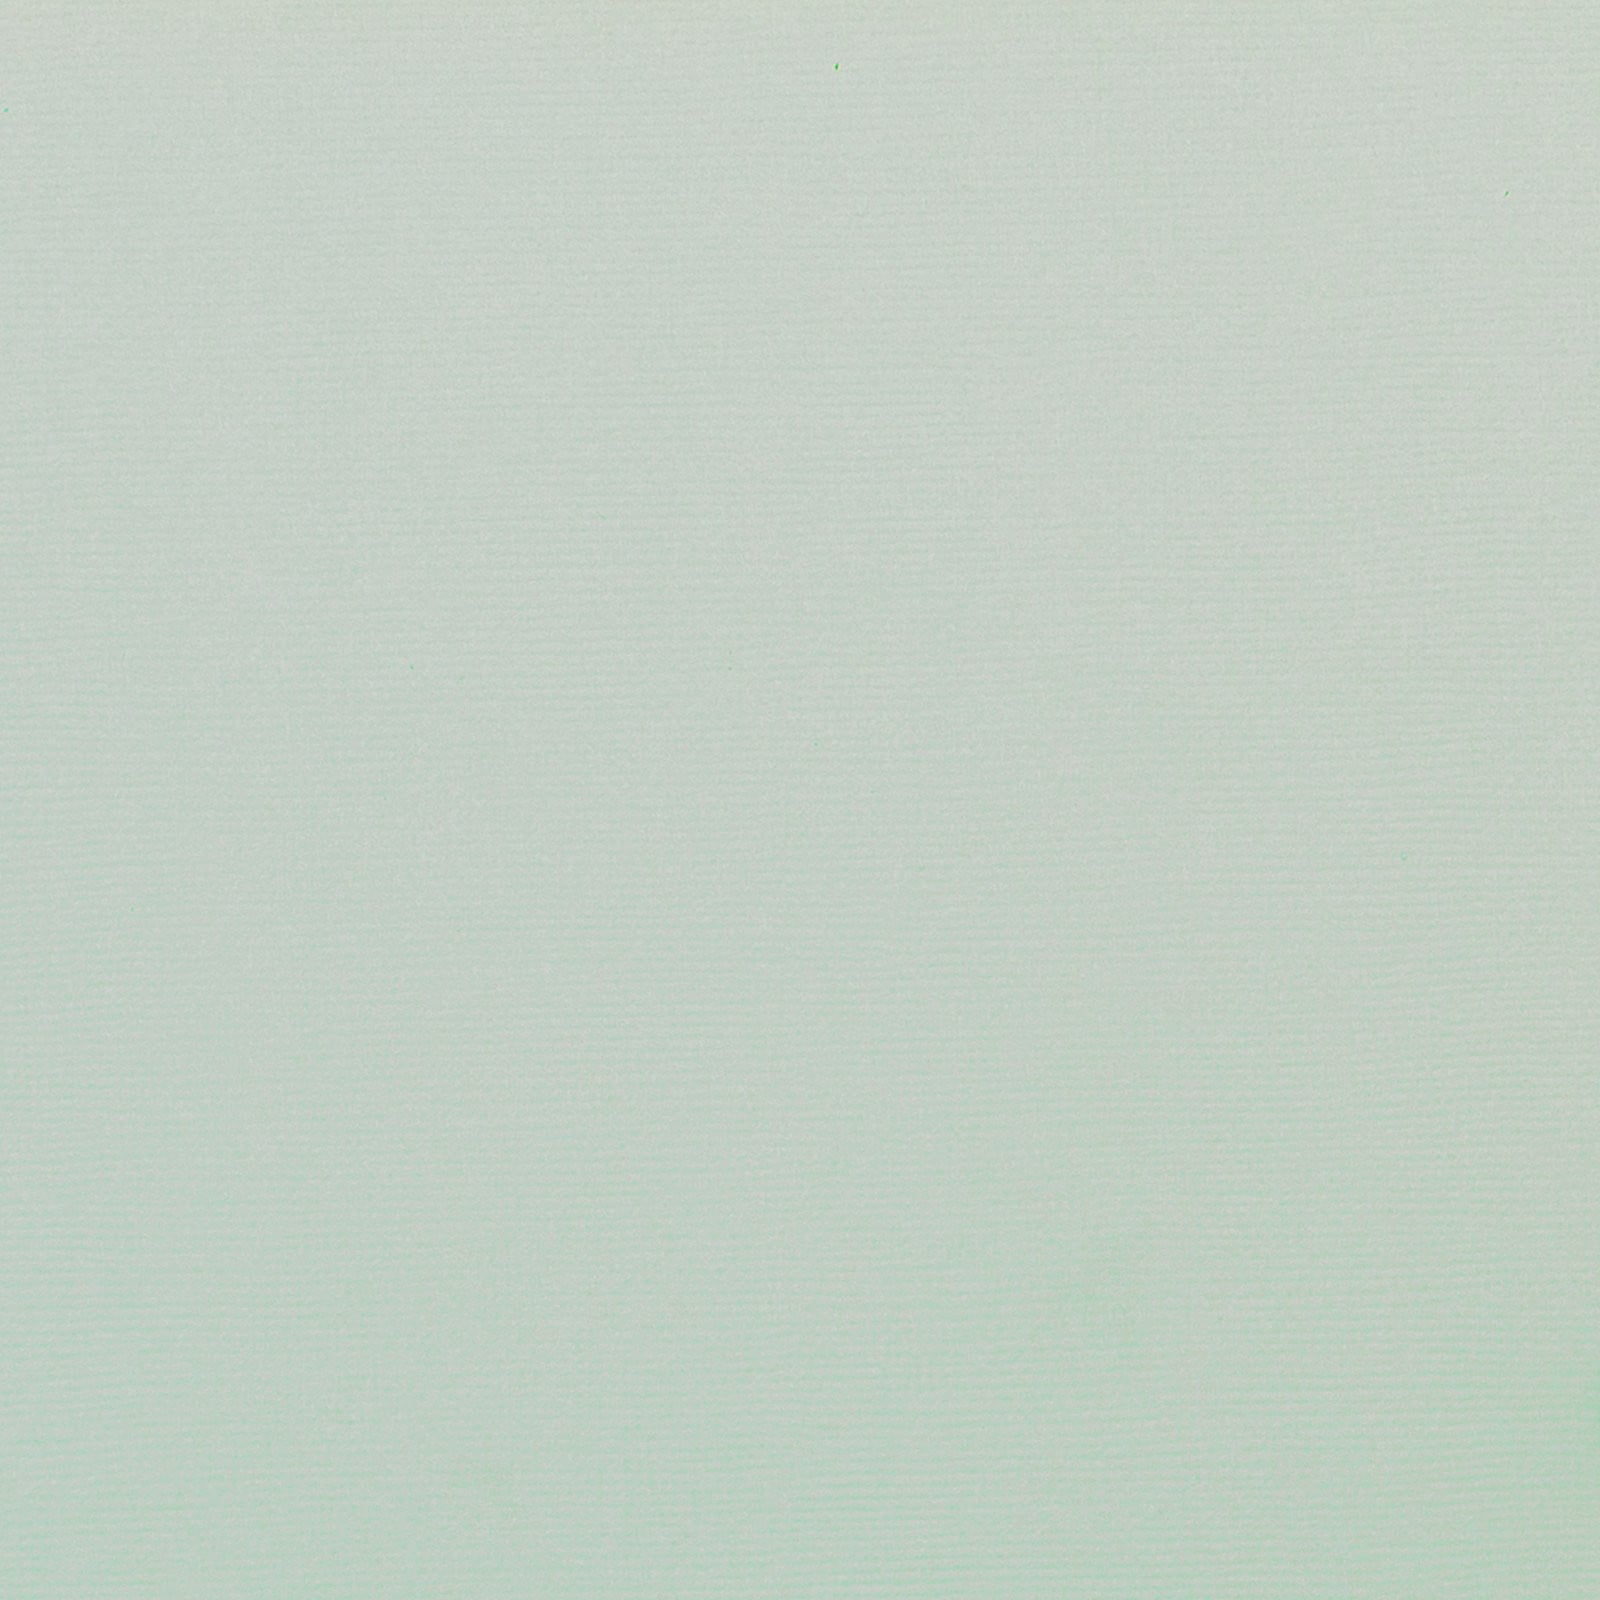 Creamy Mint Solid Color Background Image